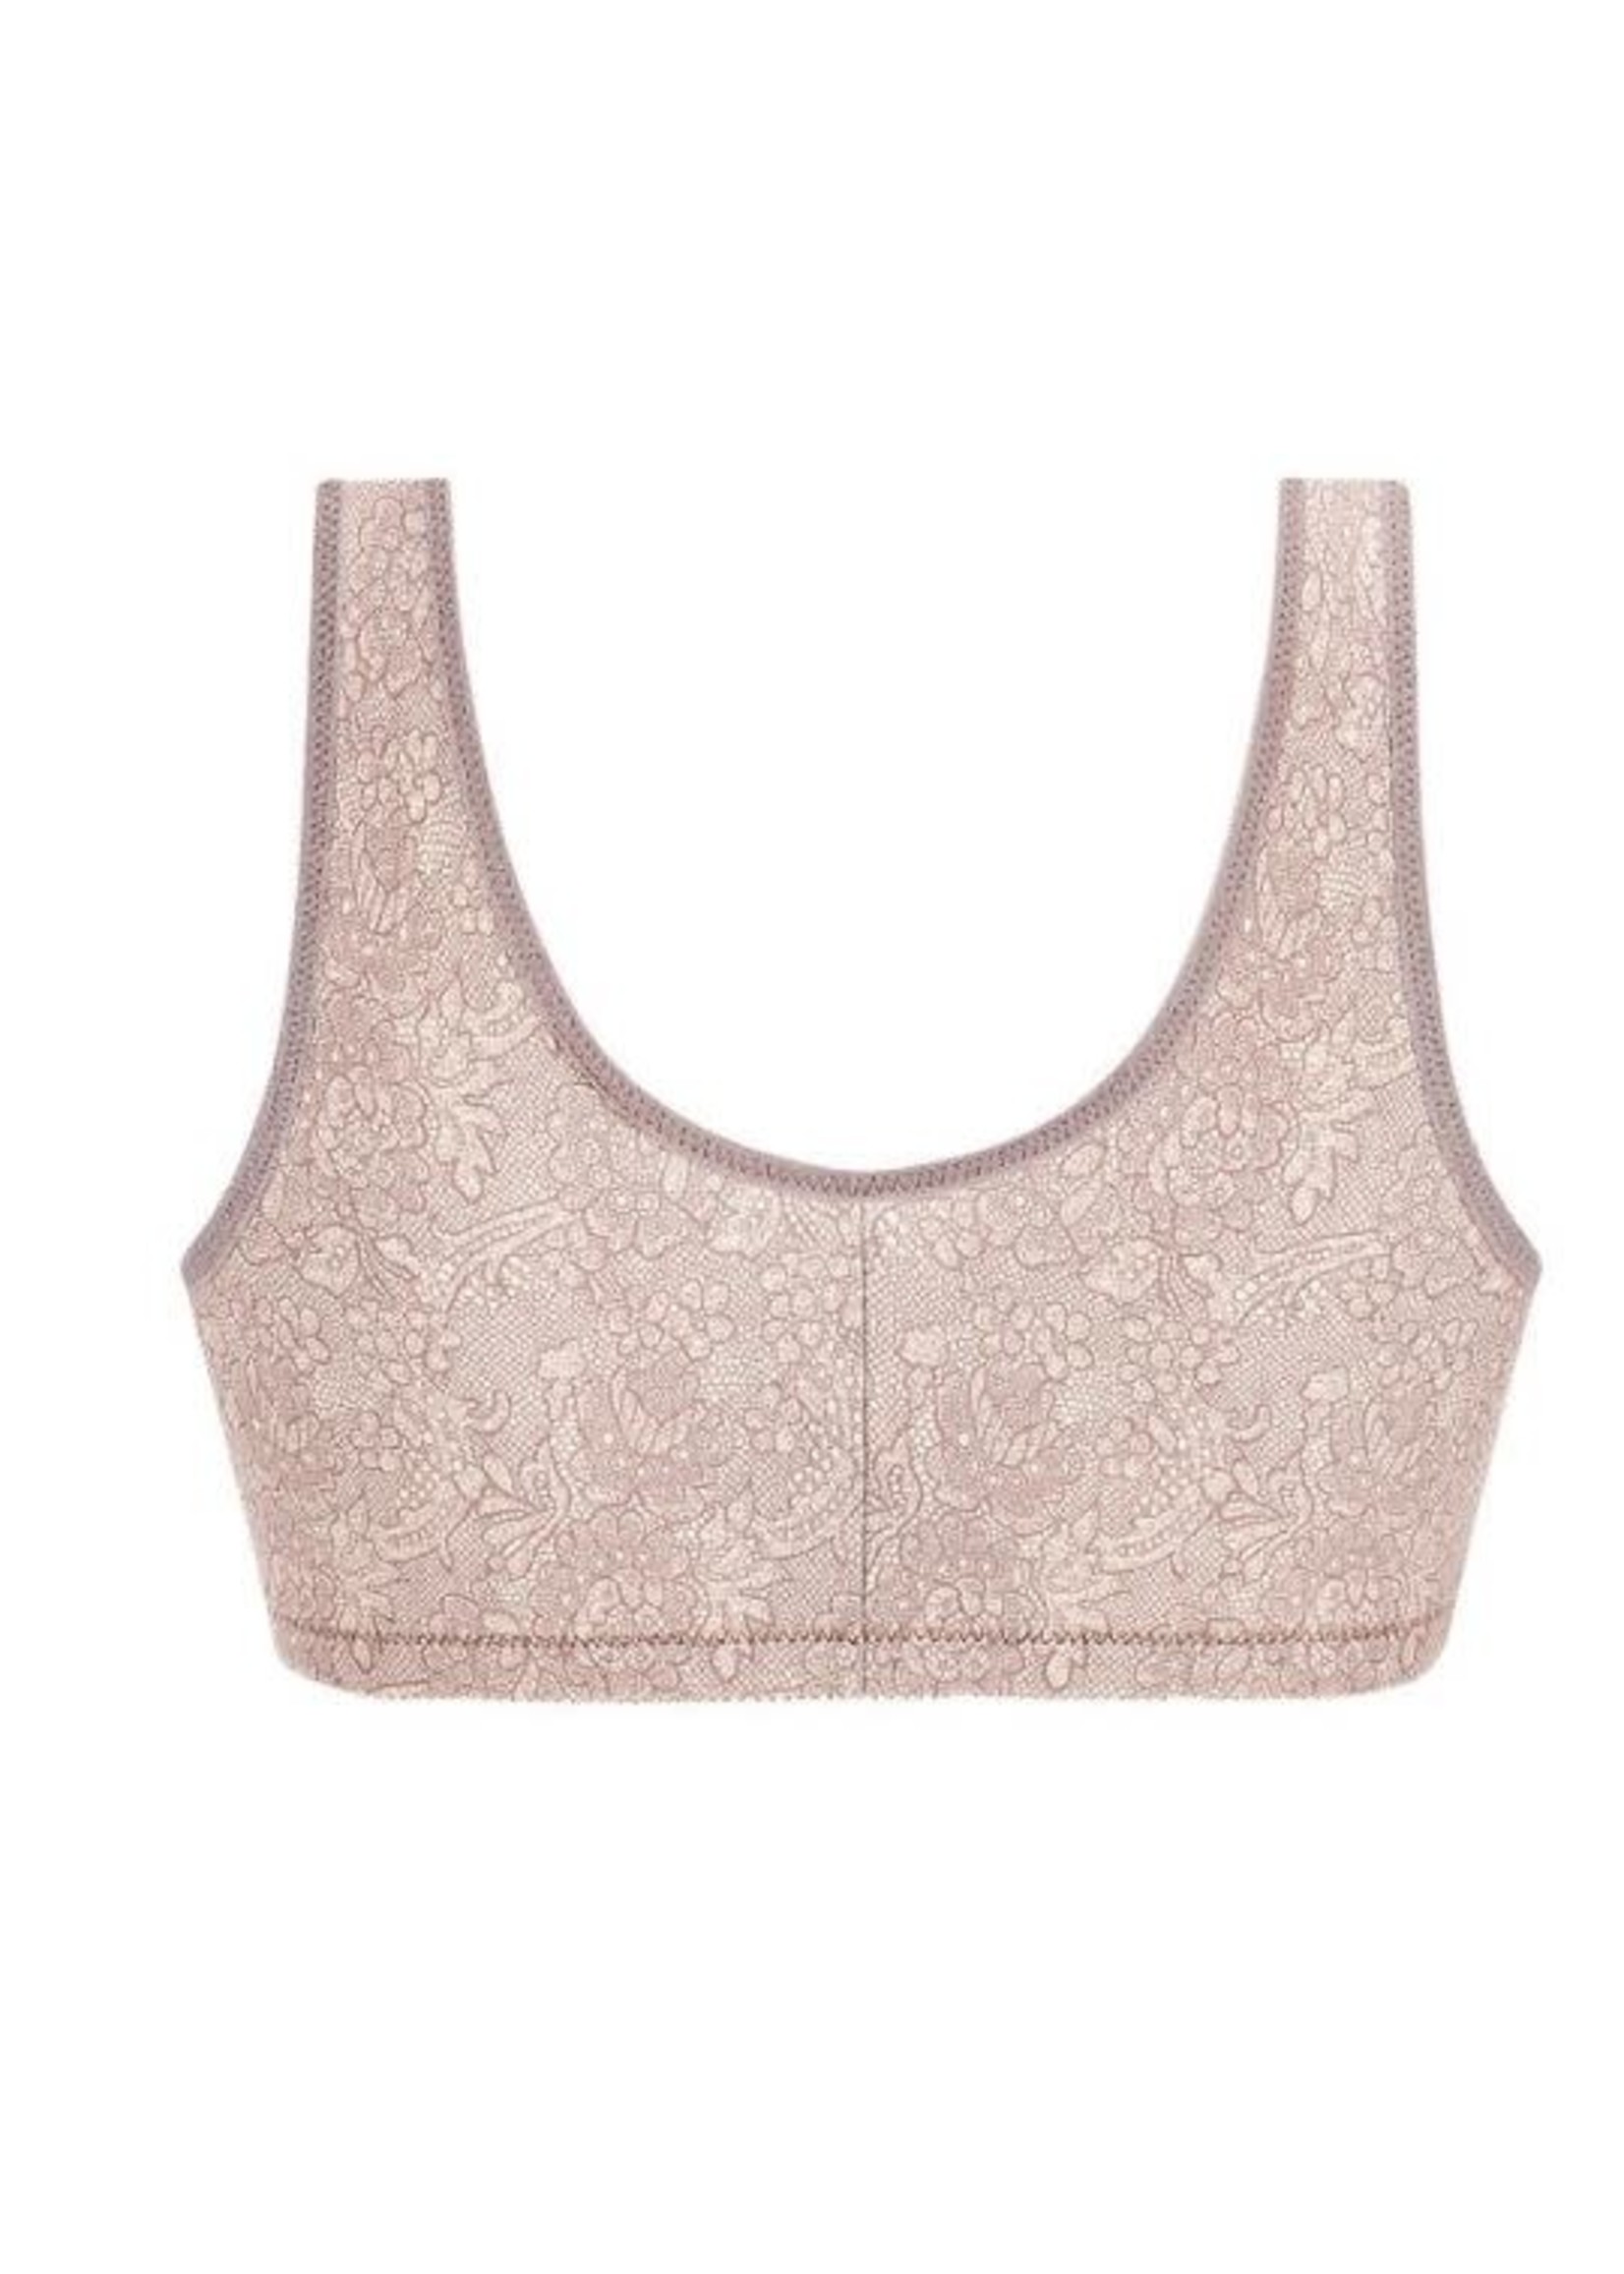 Amoena Bella Wire-free Bra-DISCONTINUED - Select Sizes & Colors Available